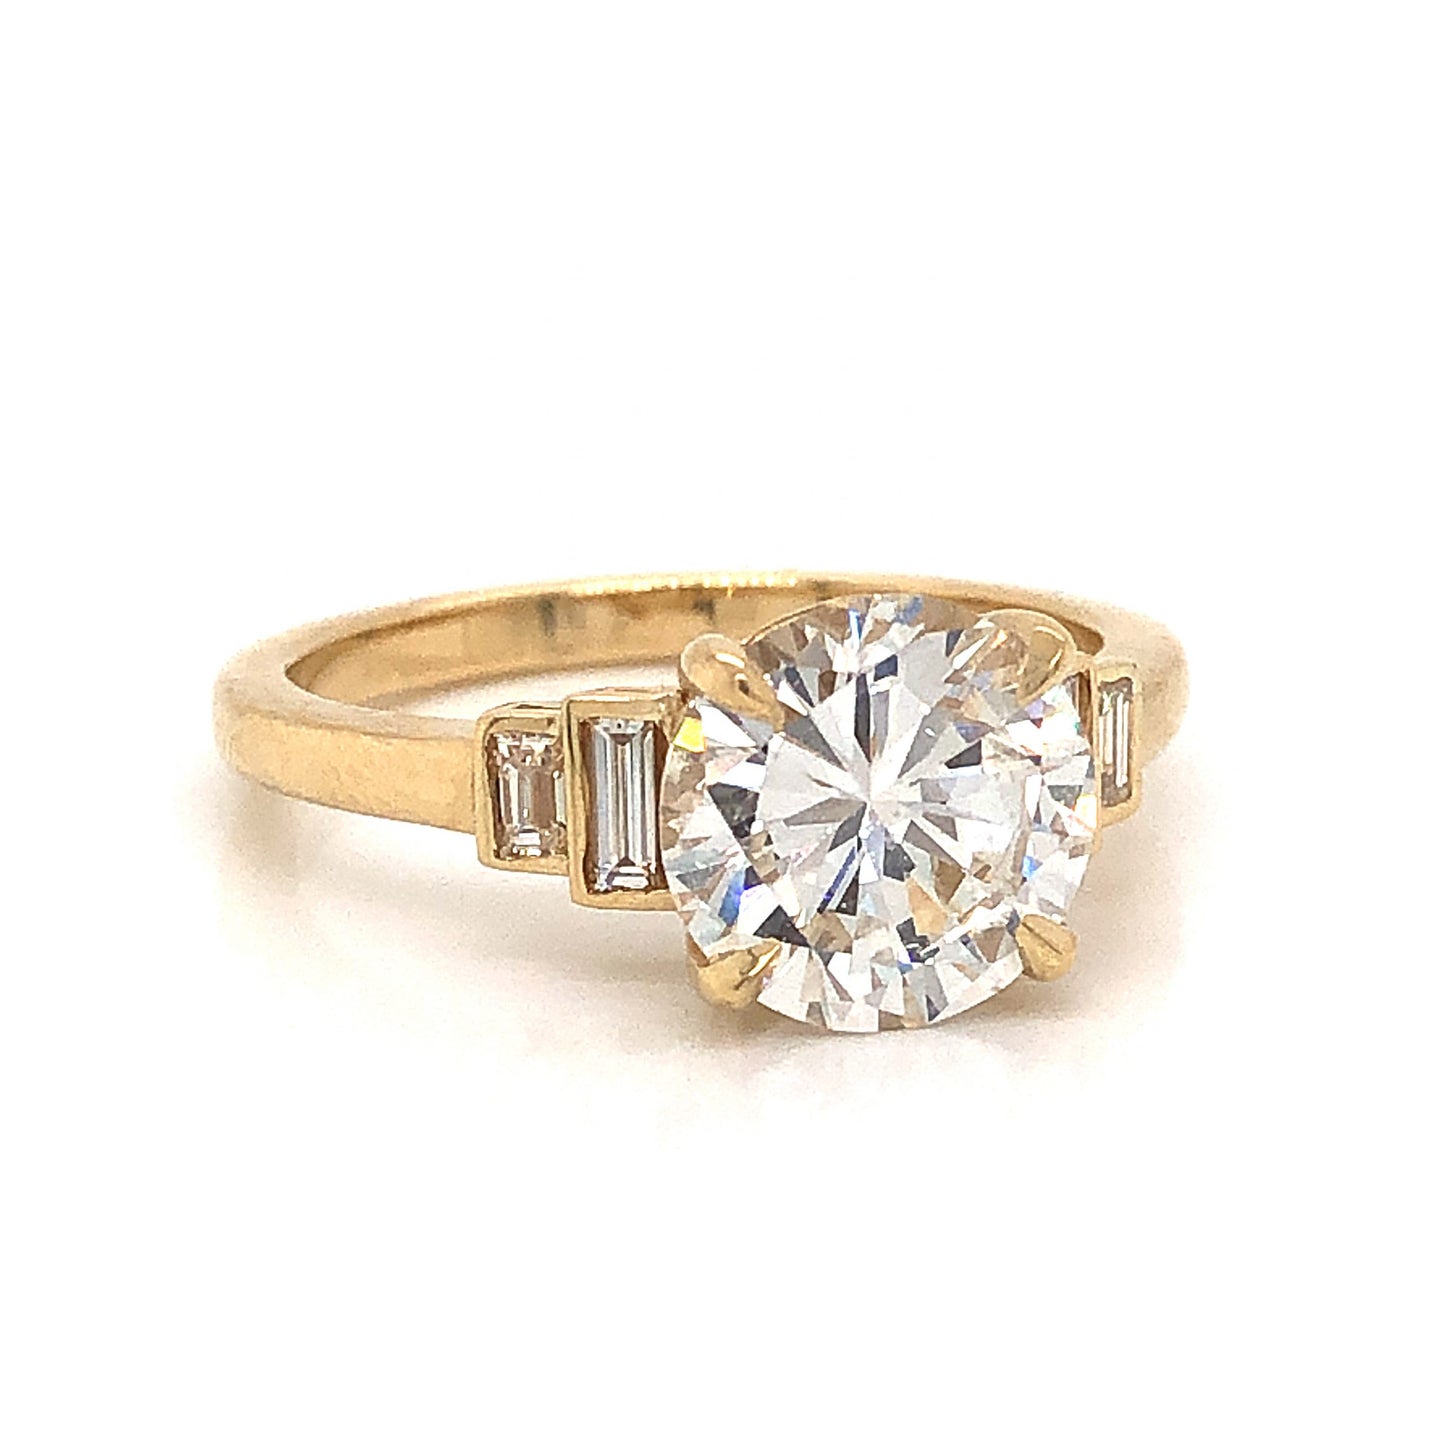 2.02 Round Brilliant Cut Diamond Engagement Ring in 14k Yellow Gold